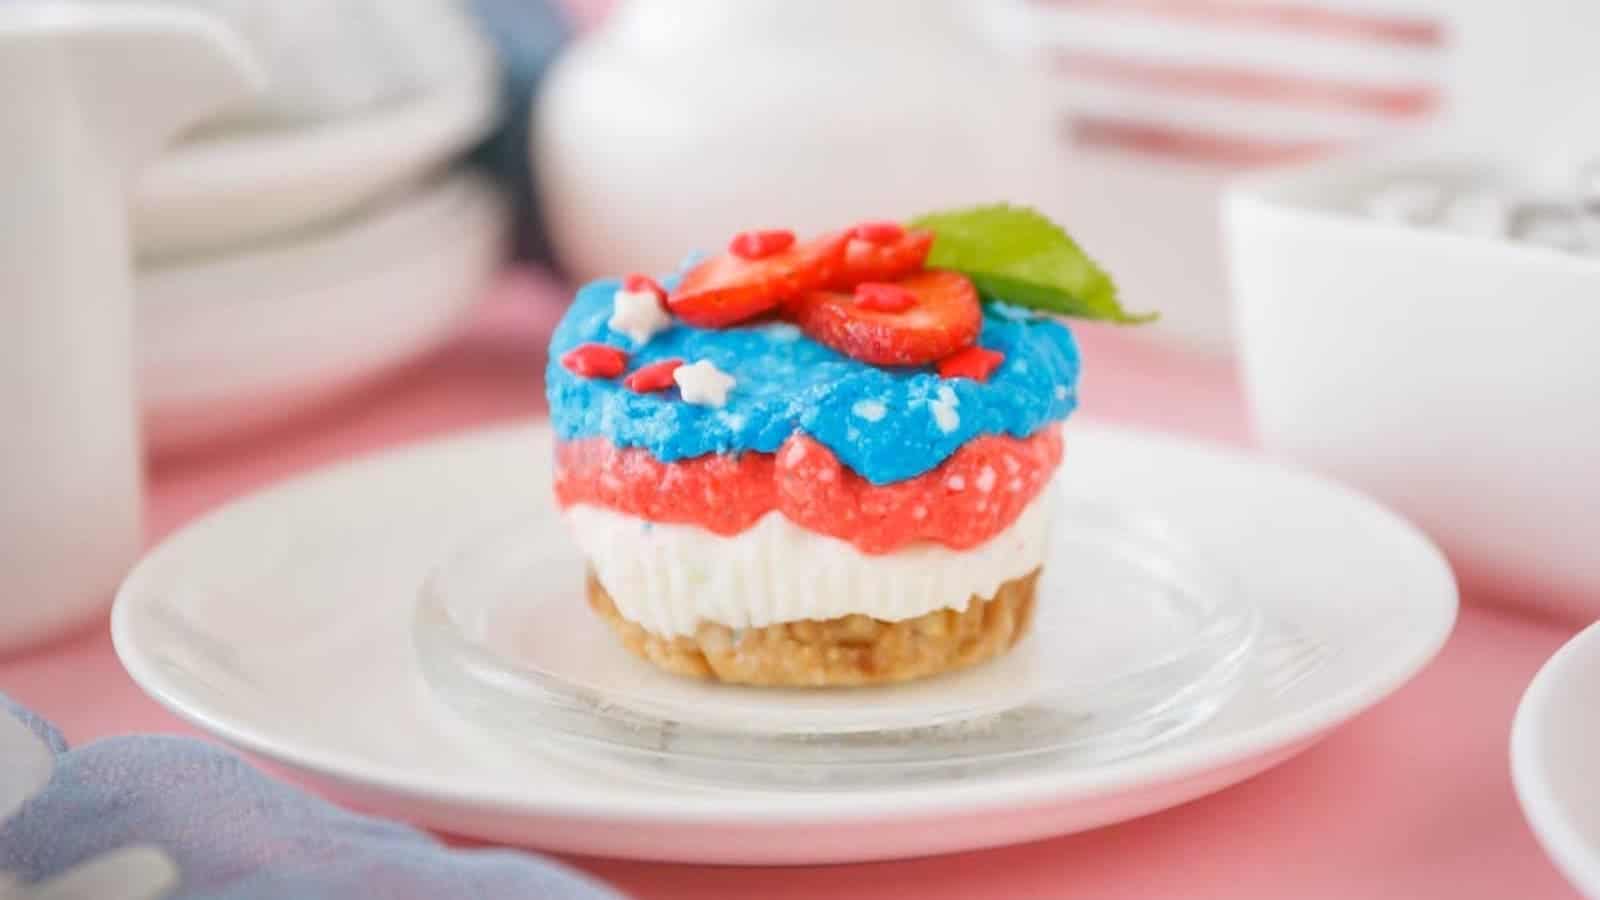 A red, white and blue mini cheesecake on a mini glass and white ceramic plates.